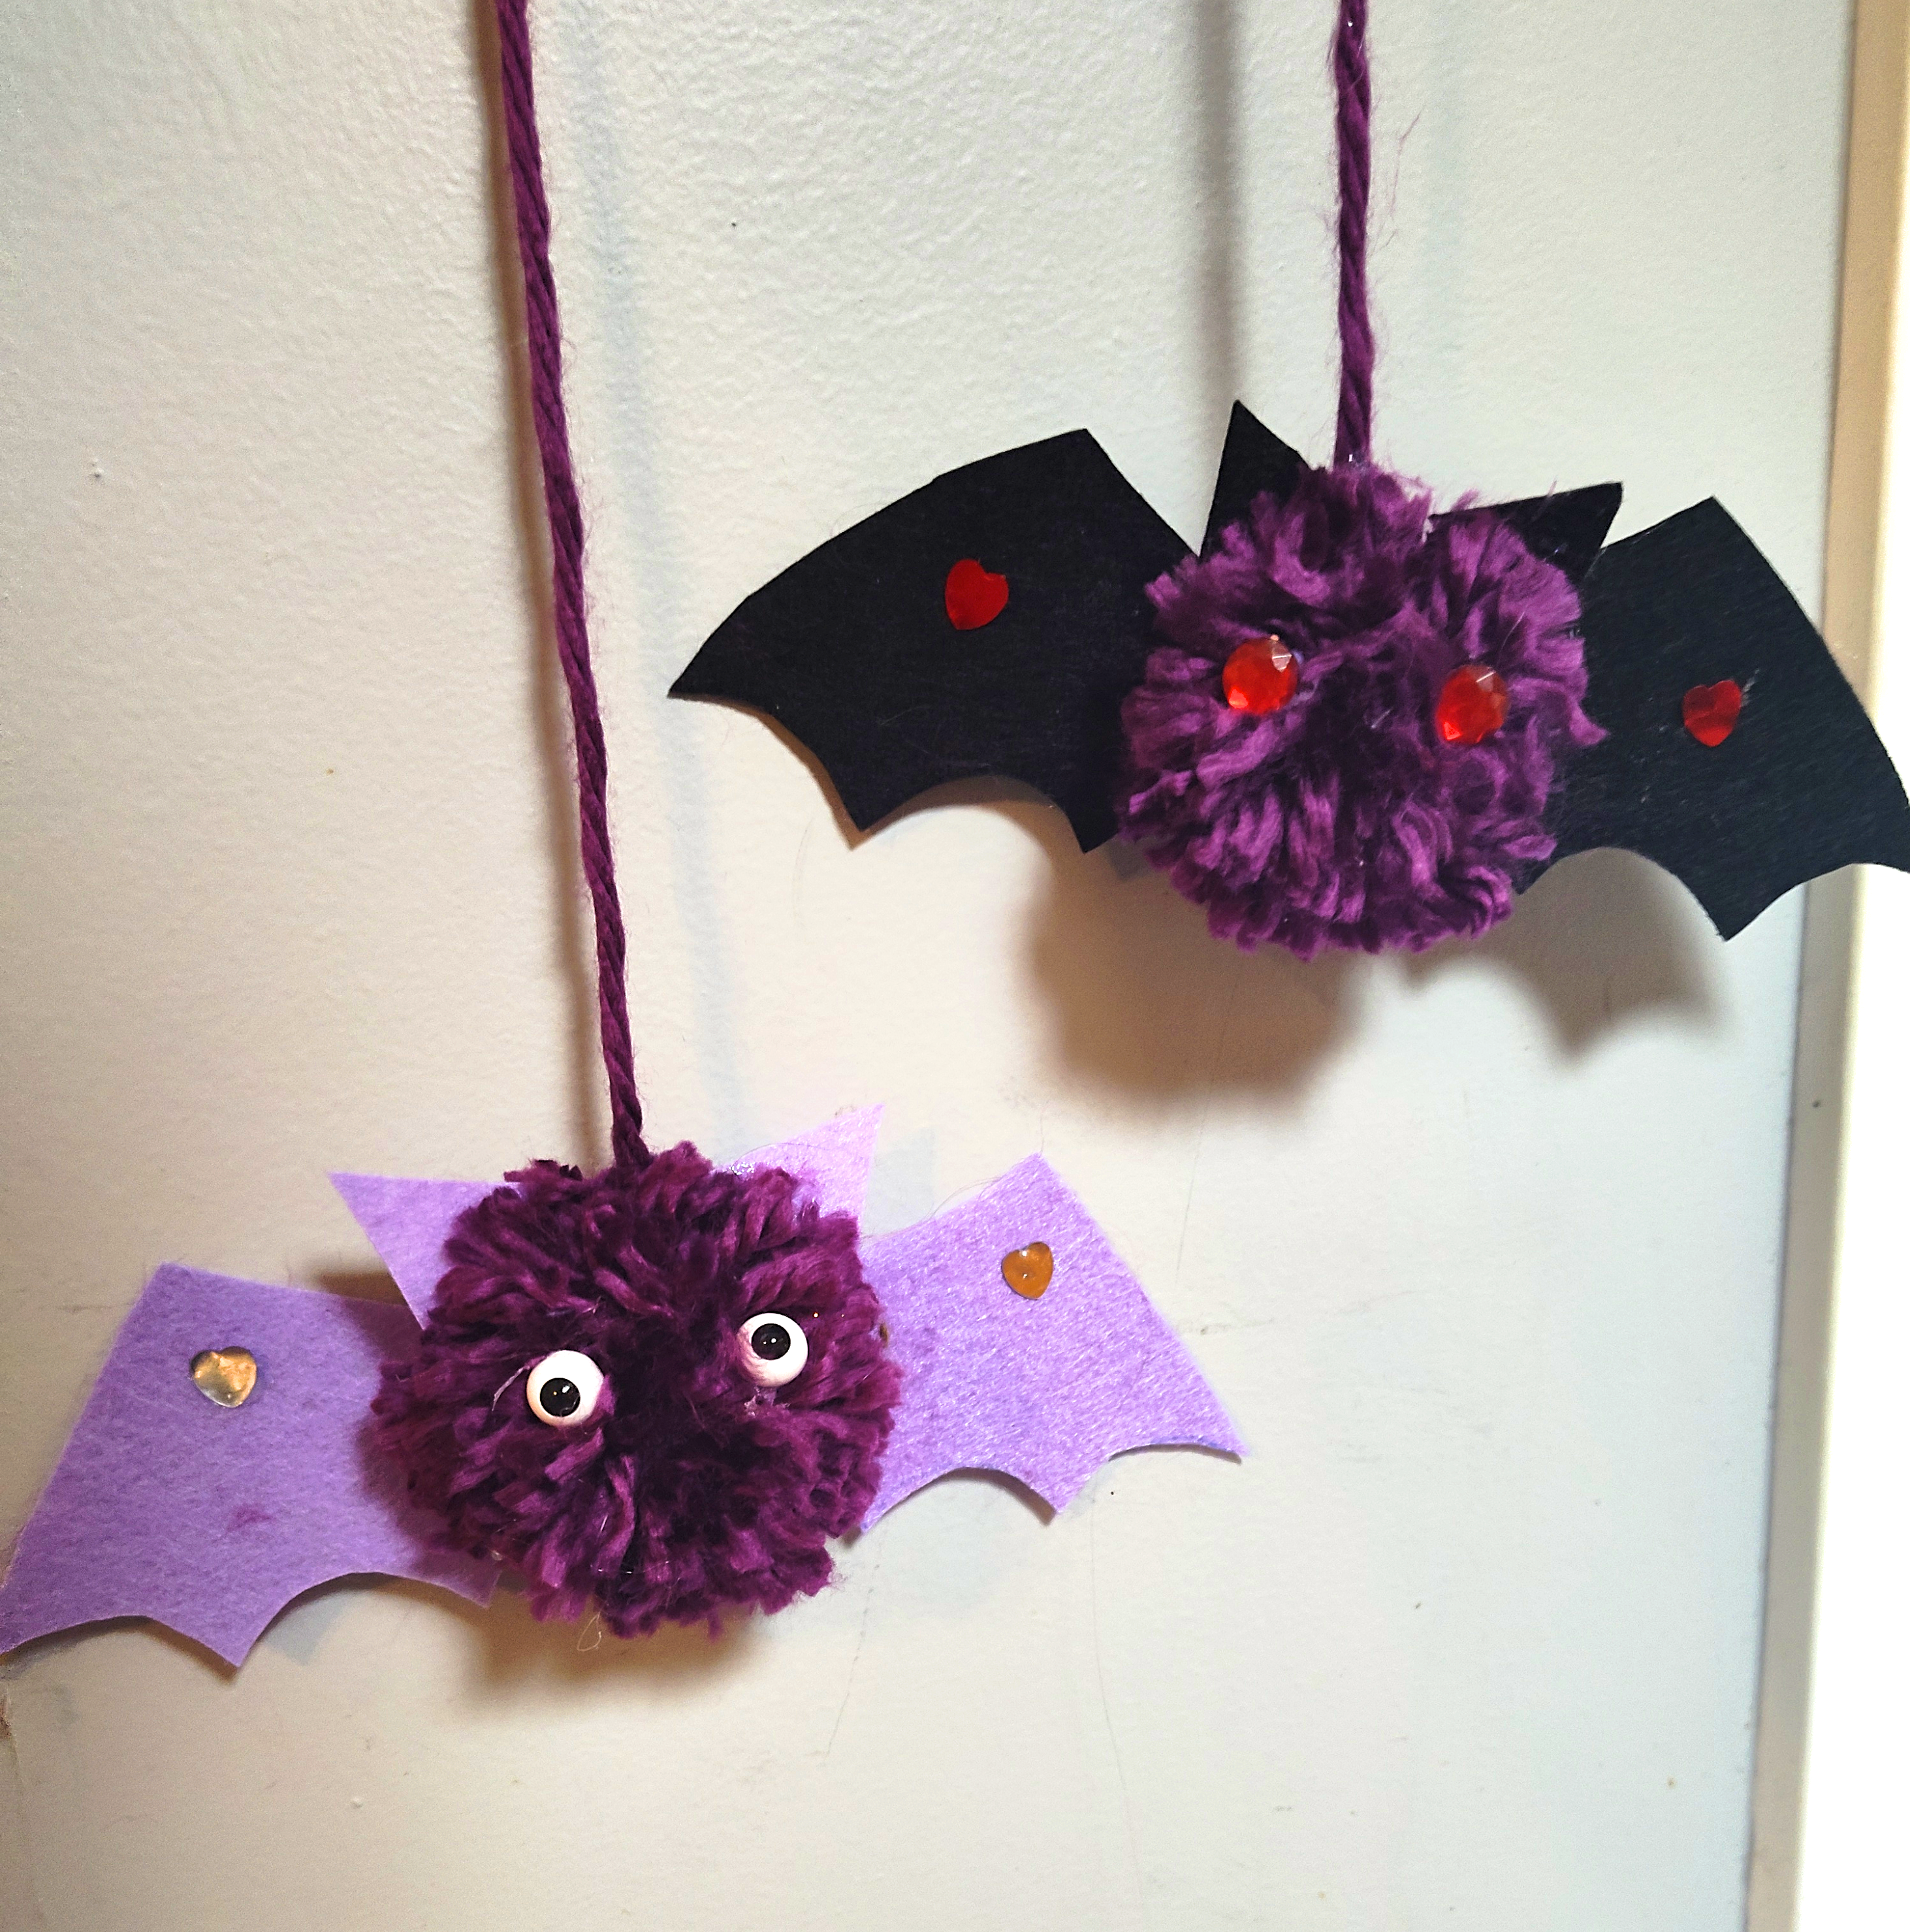 A sample of the craft featuring two purple pom pom bats